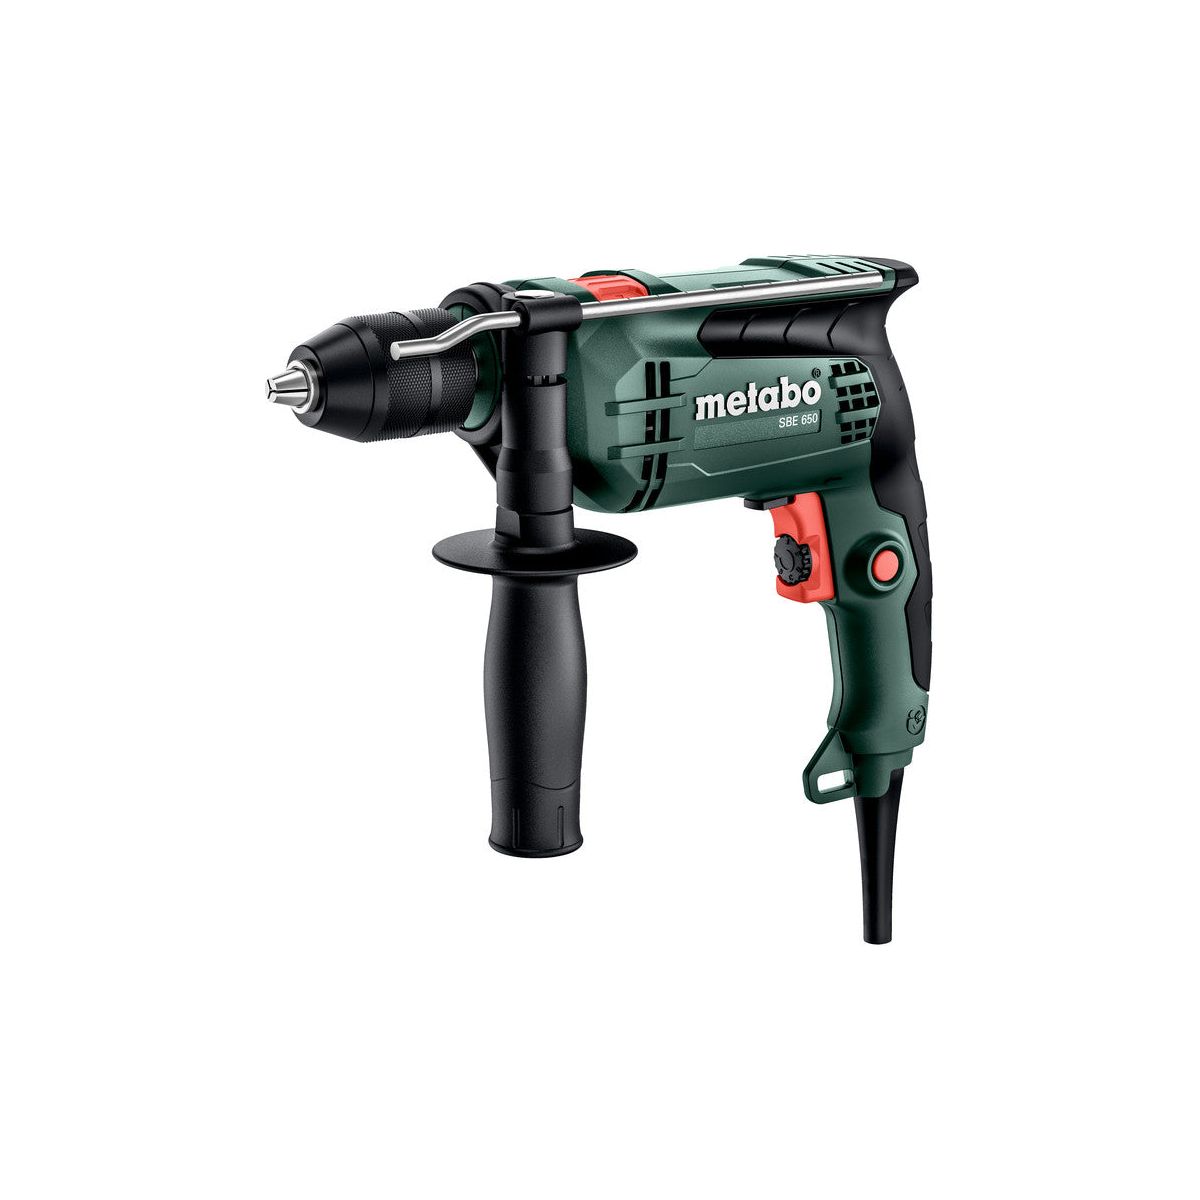 SBE 650 Perceuse à percussion Metabo